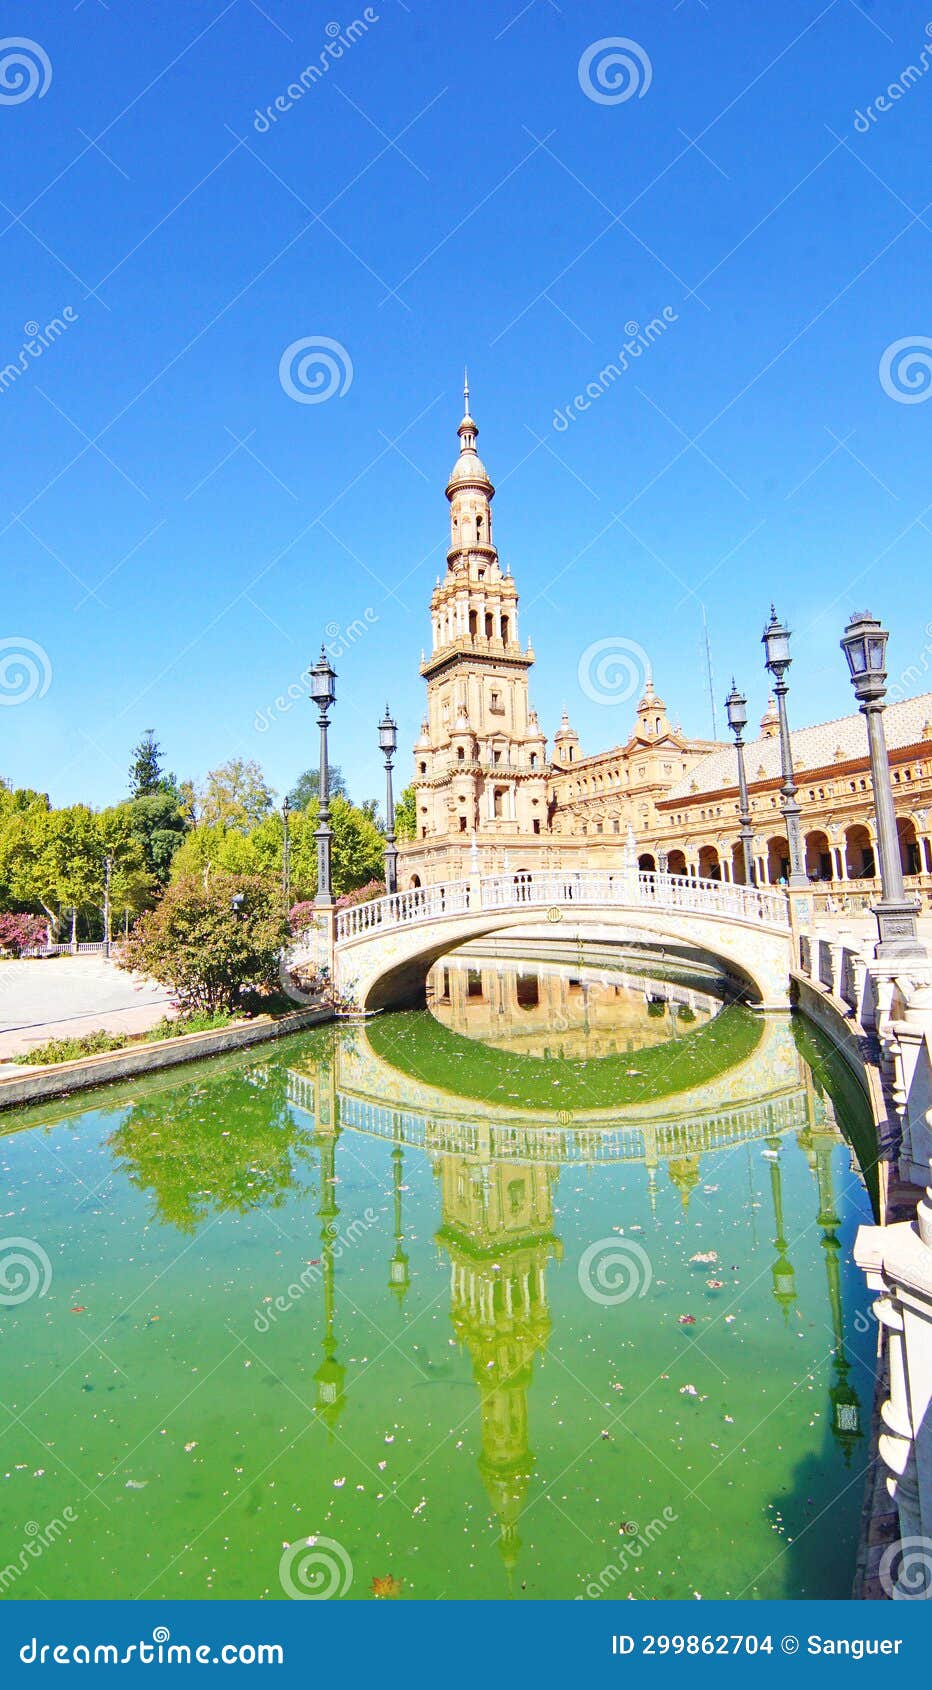 panoramic of plaza espaÃ±a or marÃ­a luisa park square in seville